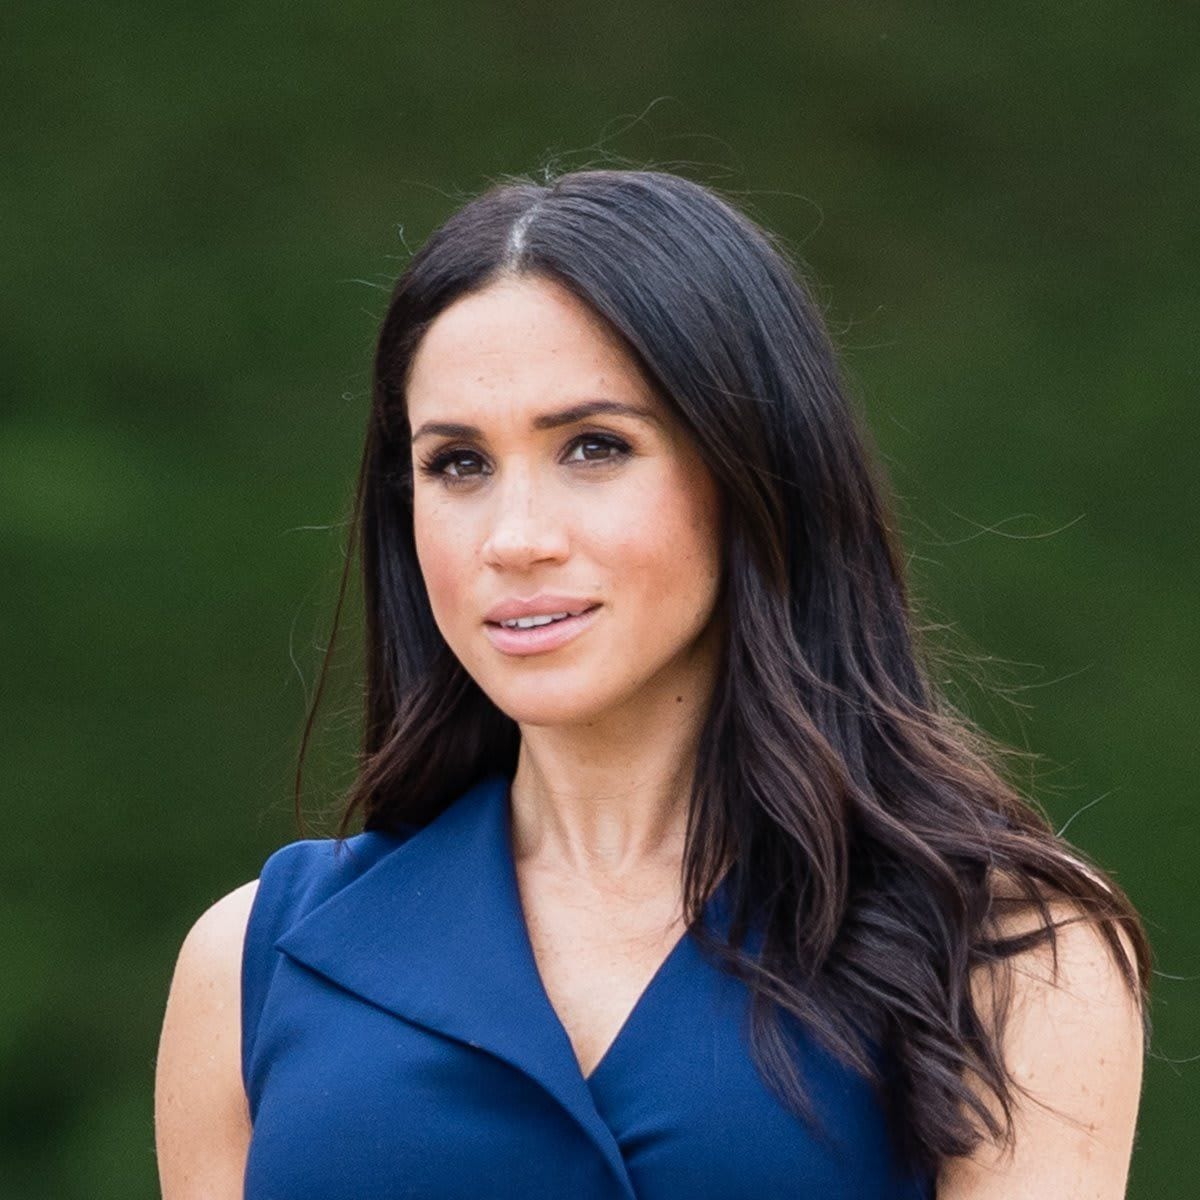 Former aide claims Meghan Markle wrote letter to dad ‘knowing it could be leaked’